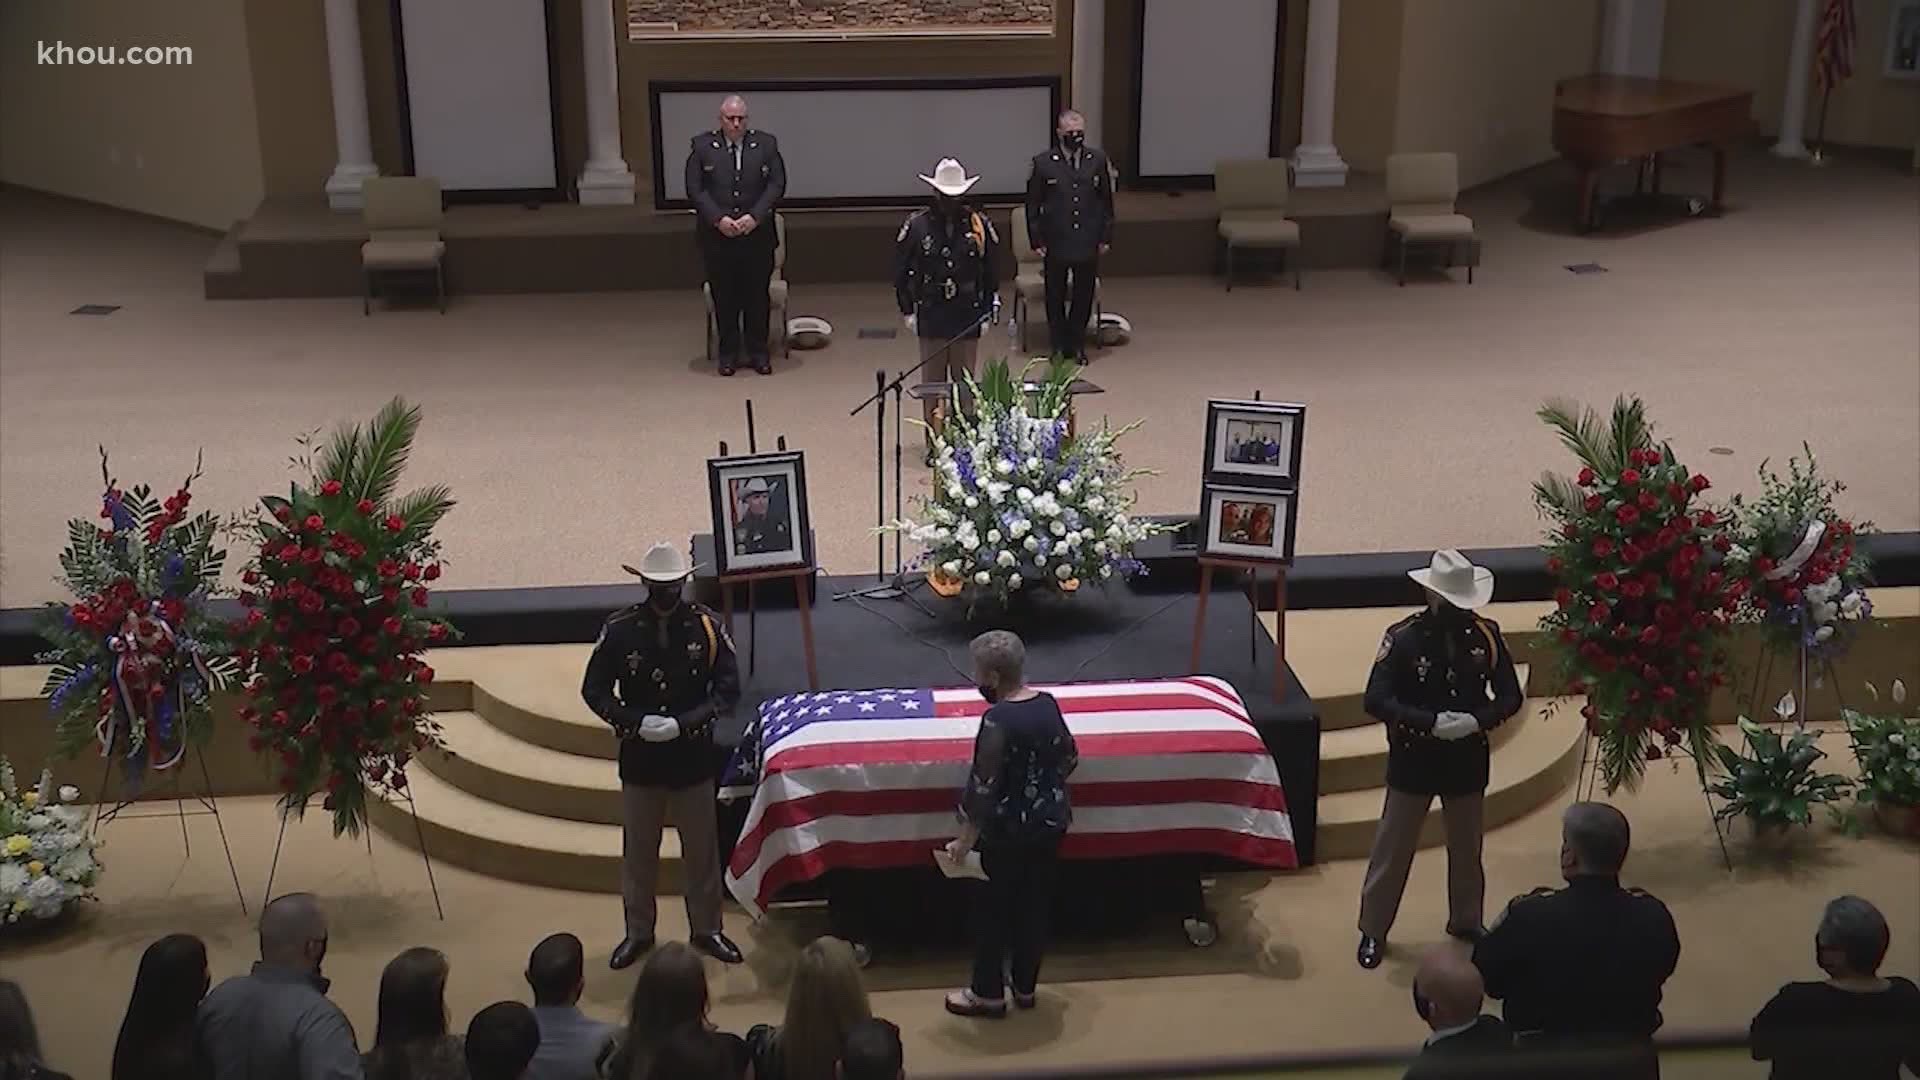 Harris County Deputy Sgt. Raymond Scholwinski was laid to rest Thursday in Humble after an emotional memorial service and End of Watch ceremony.